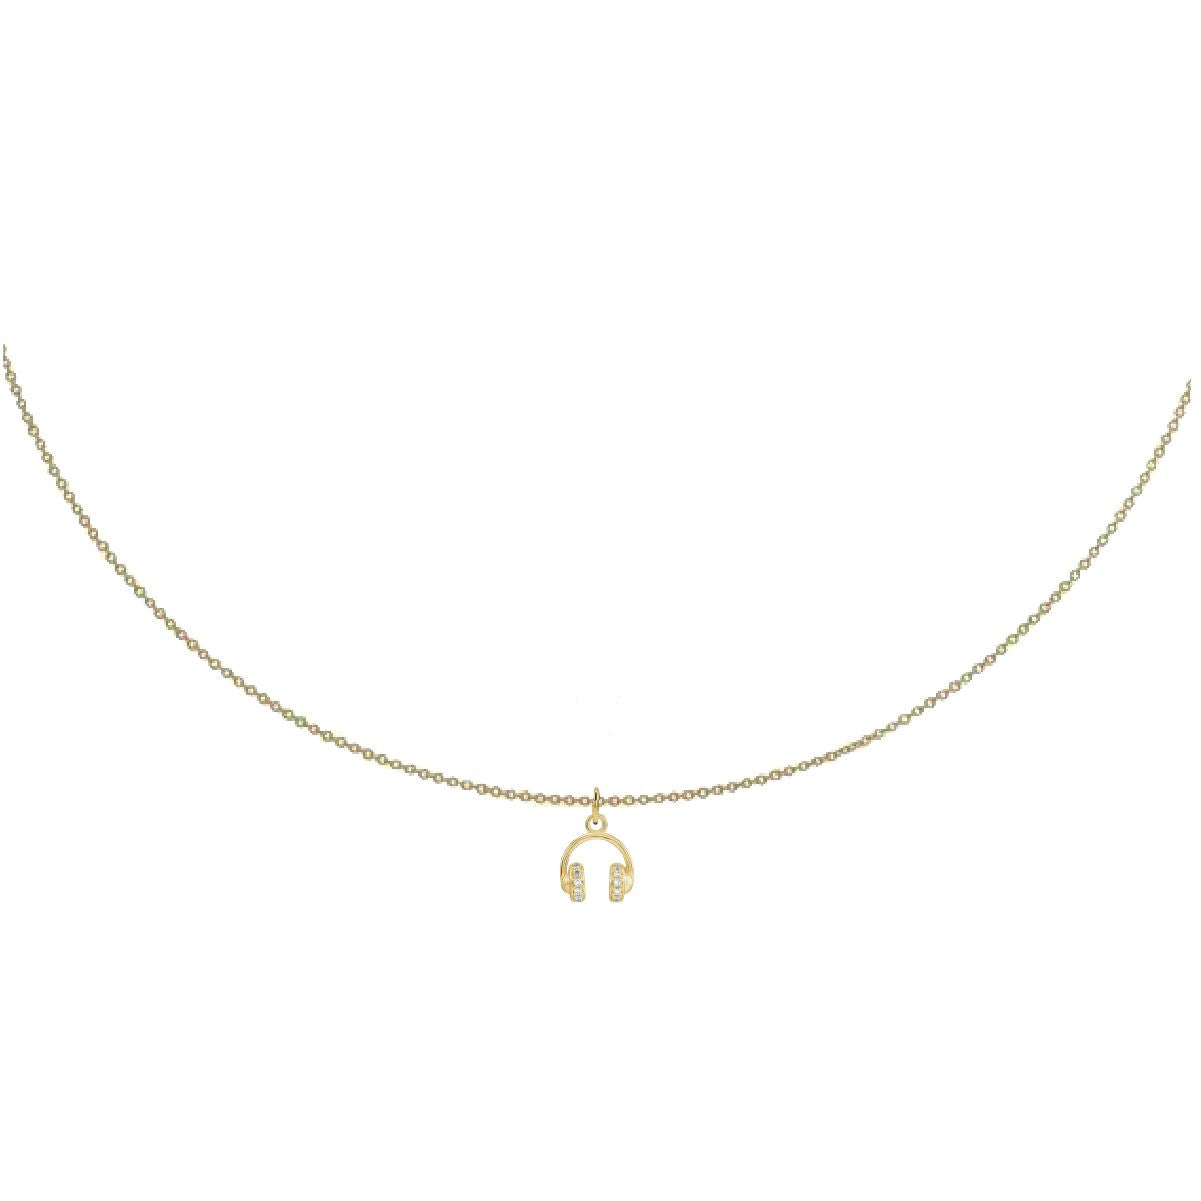 Charm Collection - For the Music Lover Robyn Canady Charm + 14K Gold Filled Chain None 